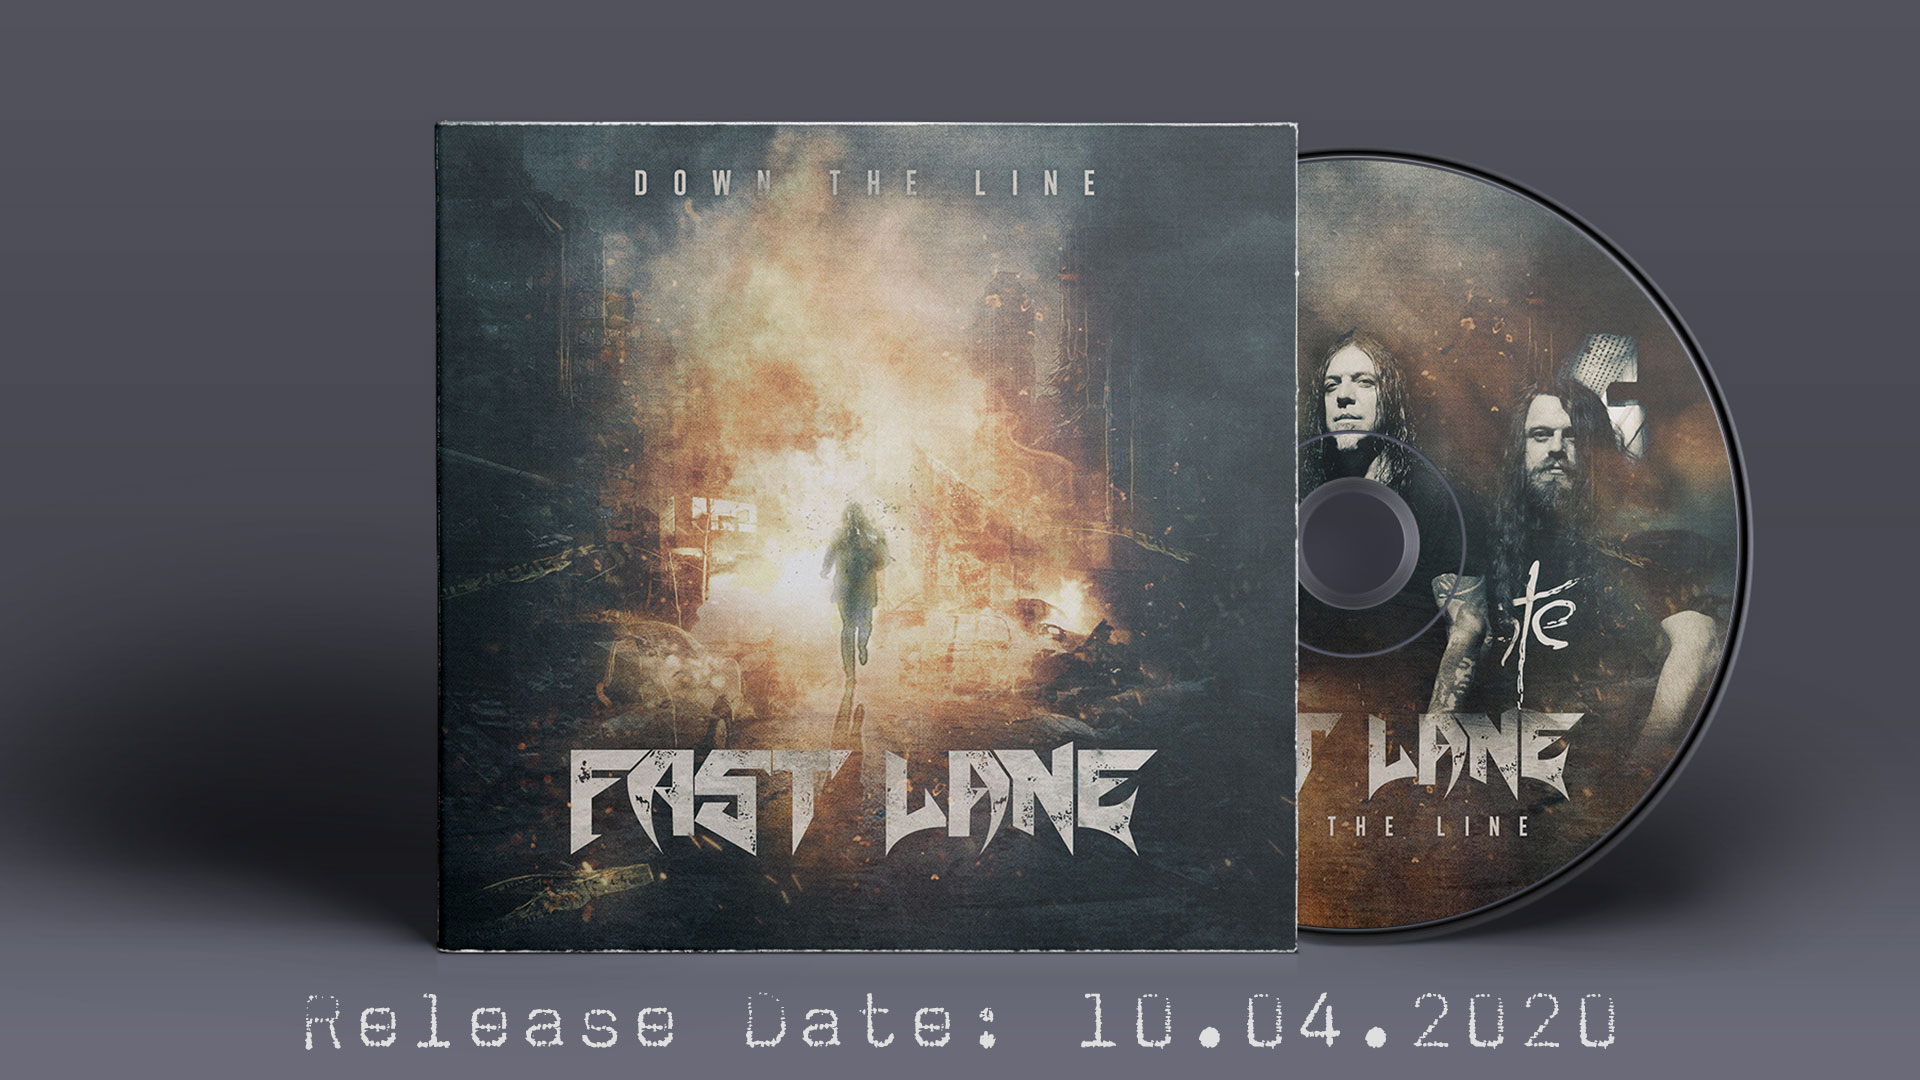 Fast Lane - new single “Down The Line” out 10.04.2020!